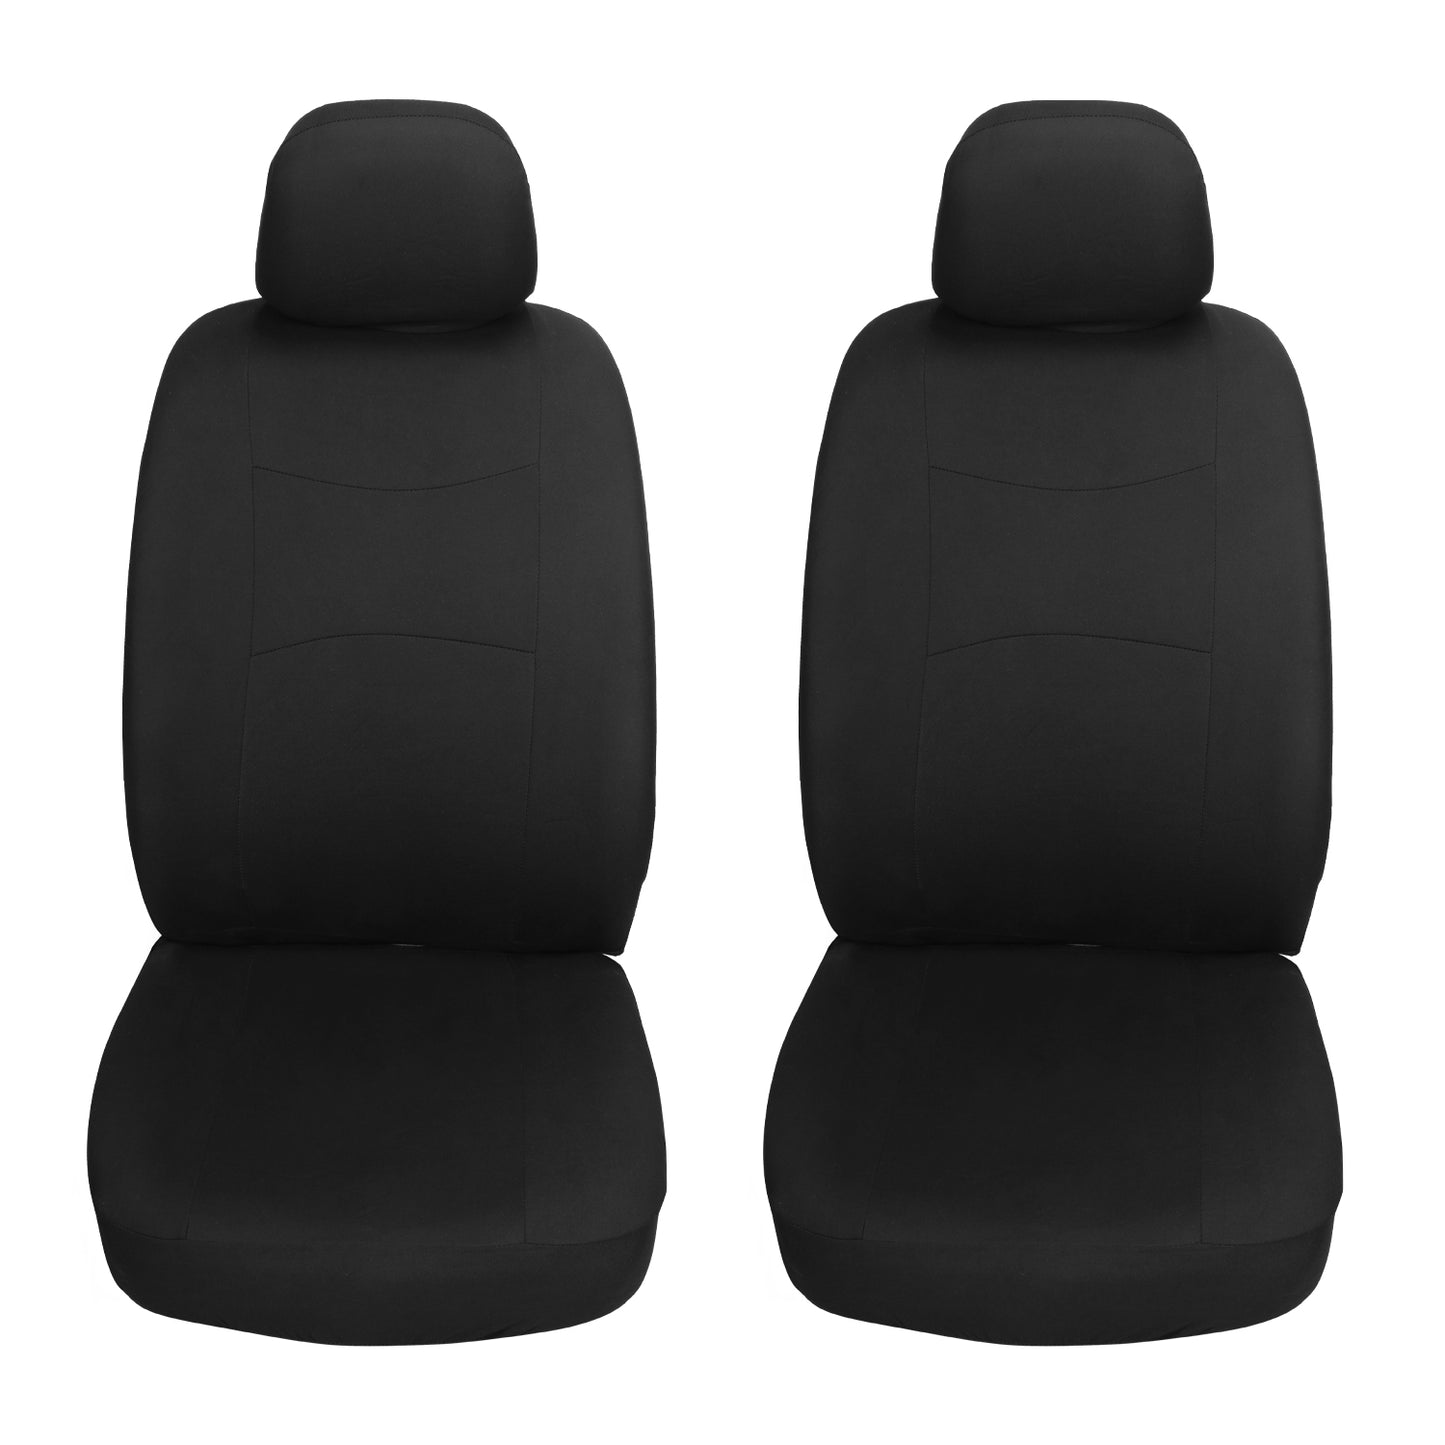 11PCS Universal Car Seat Covers Fit Interior Accessories For Auto Truck Van SUV